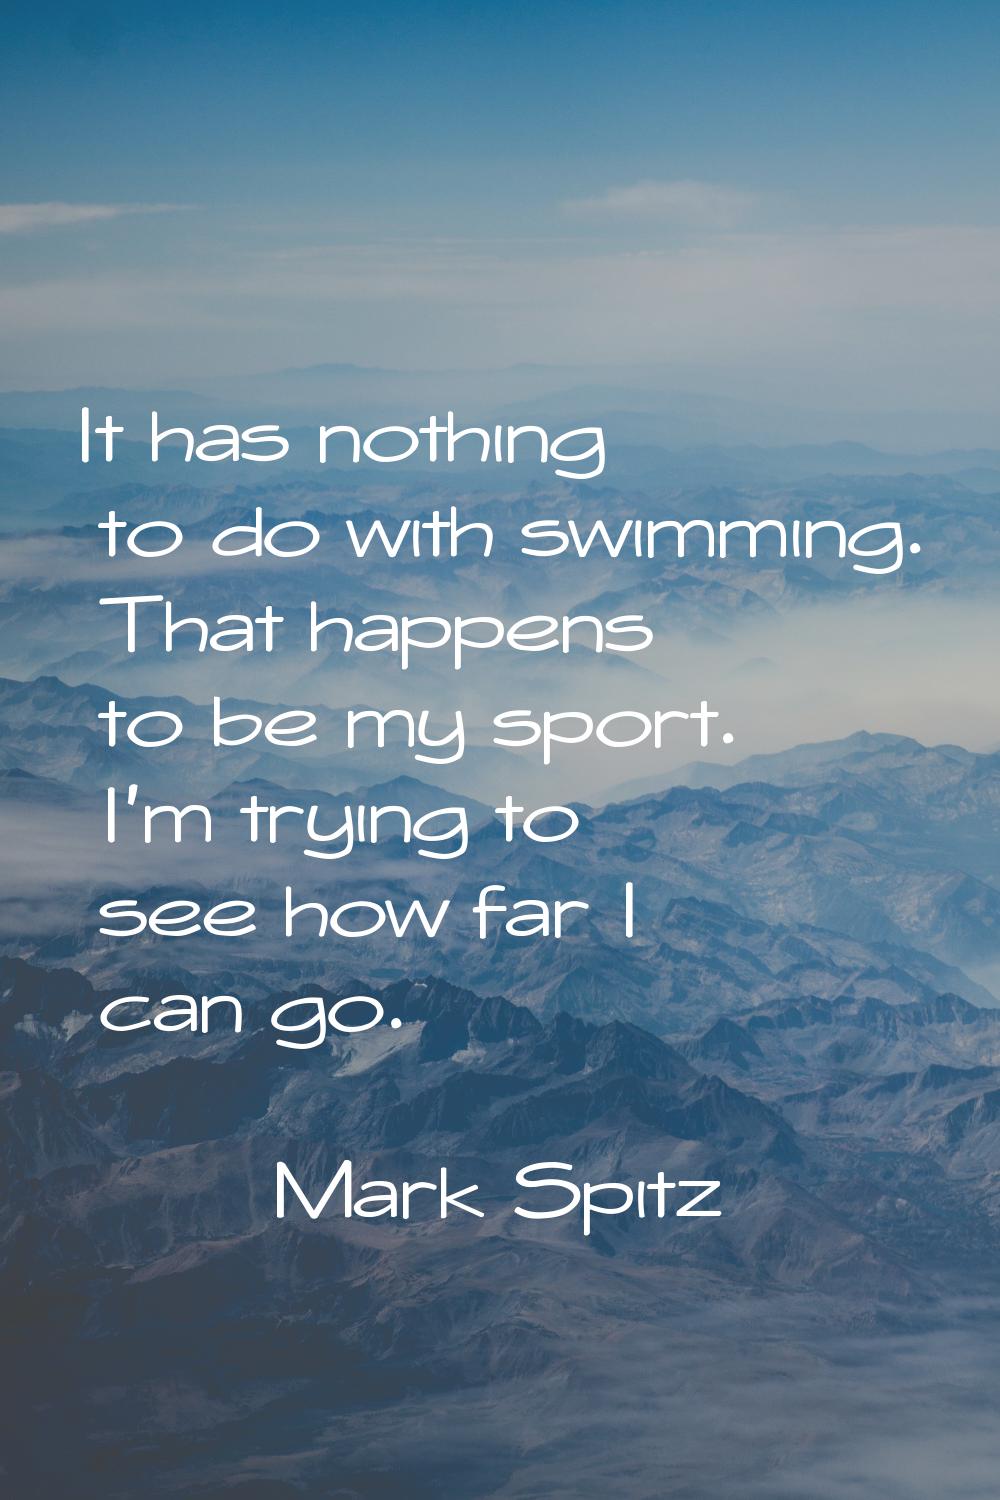 It has nothing to do with swimming. That happens to be my sport. I'm trying to see how far I can go